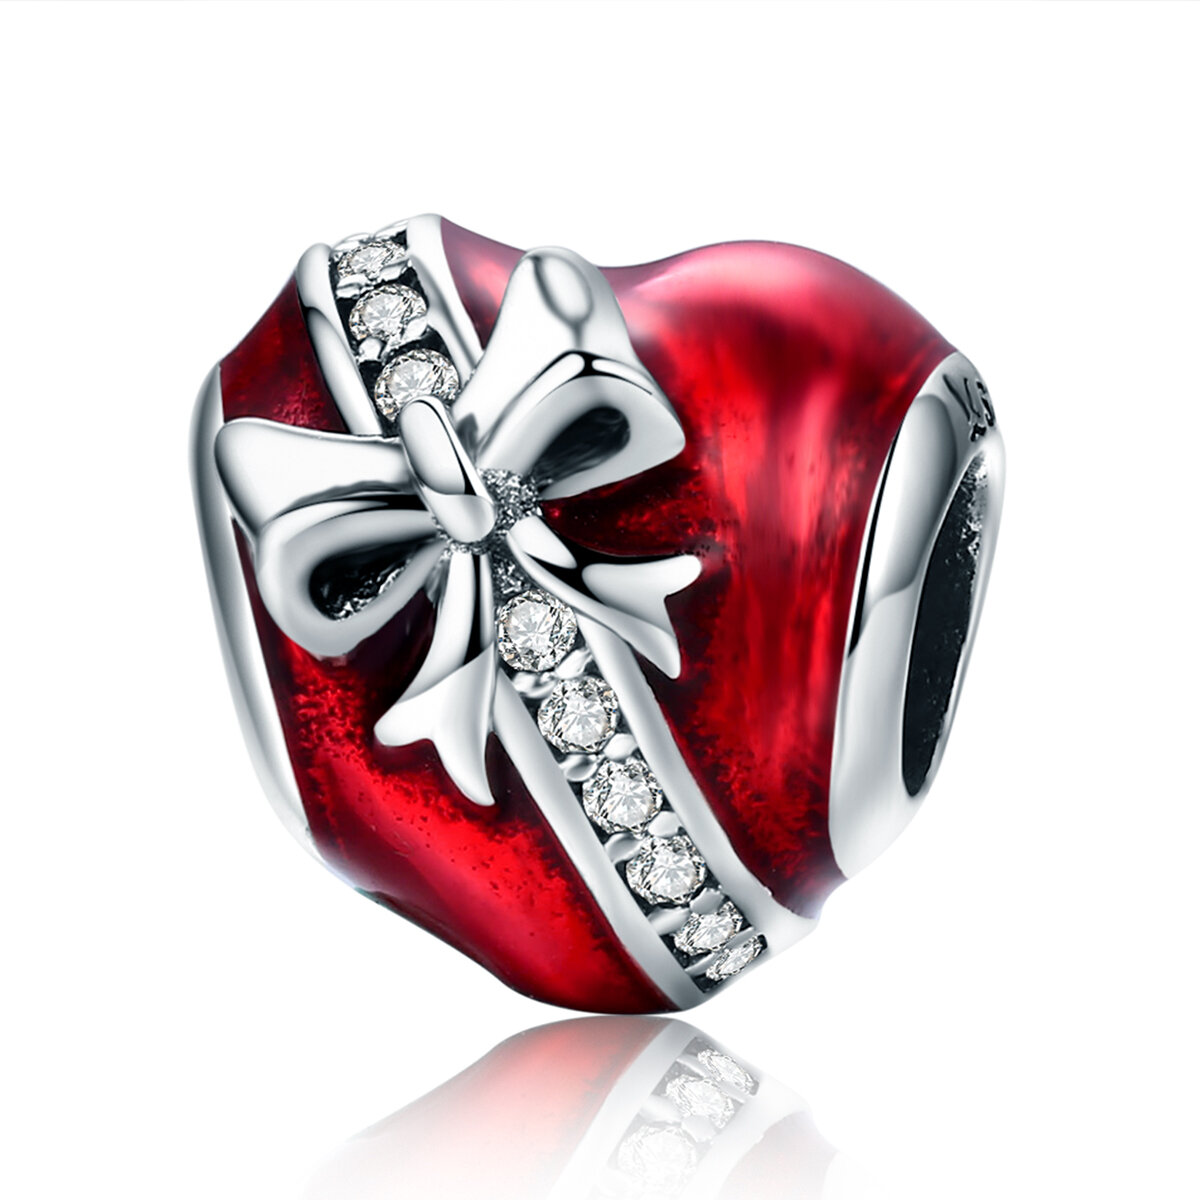 GemKing SCC741 the Gift of Love S925 Sterling Silver Charm